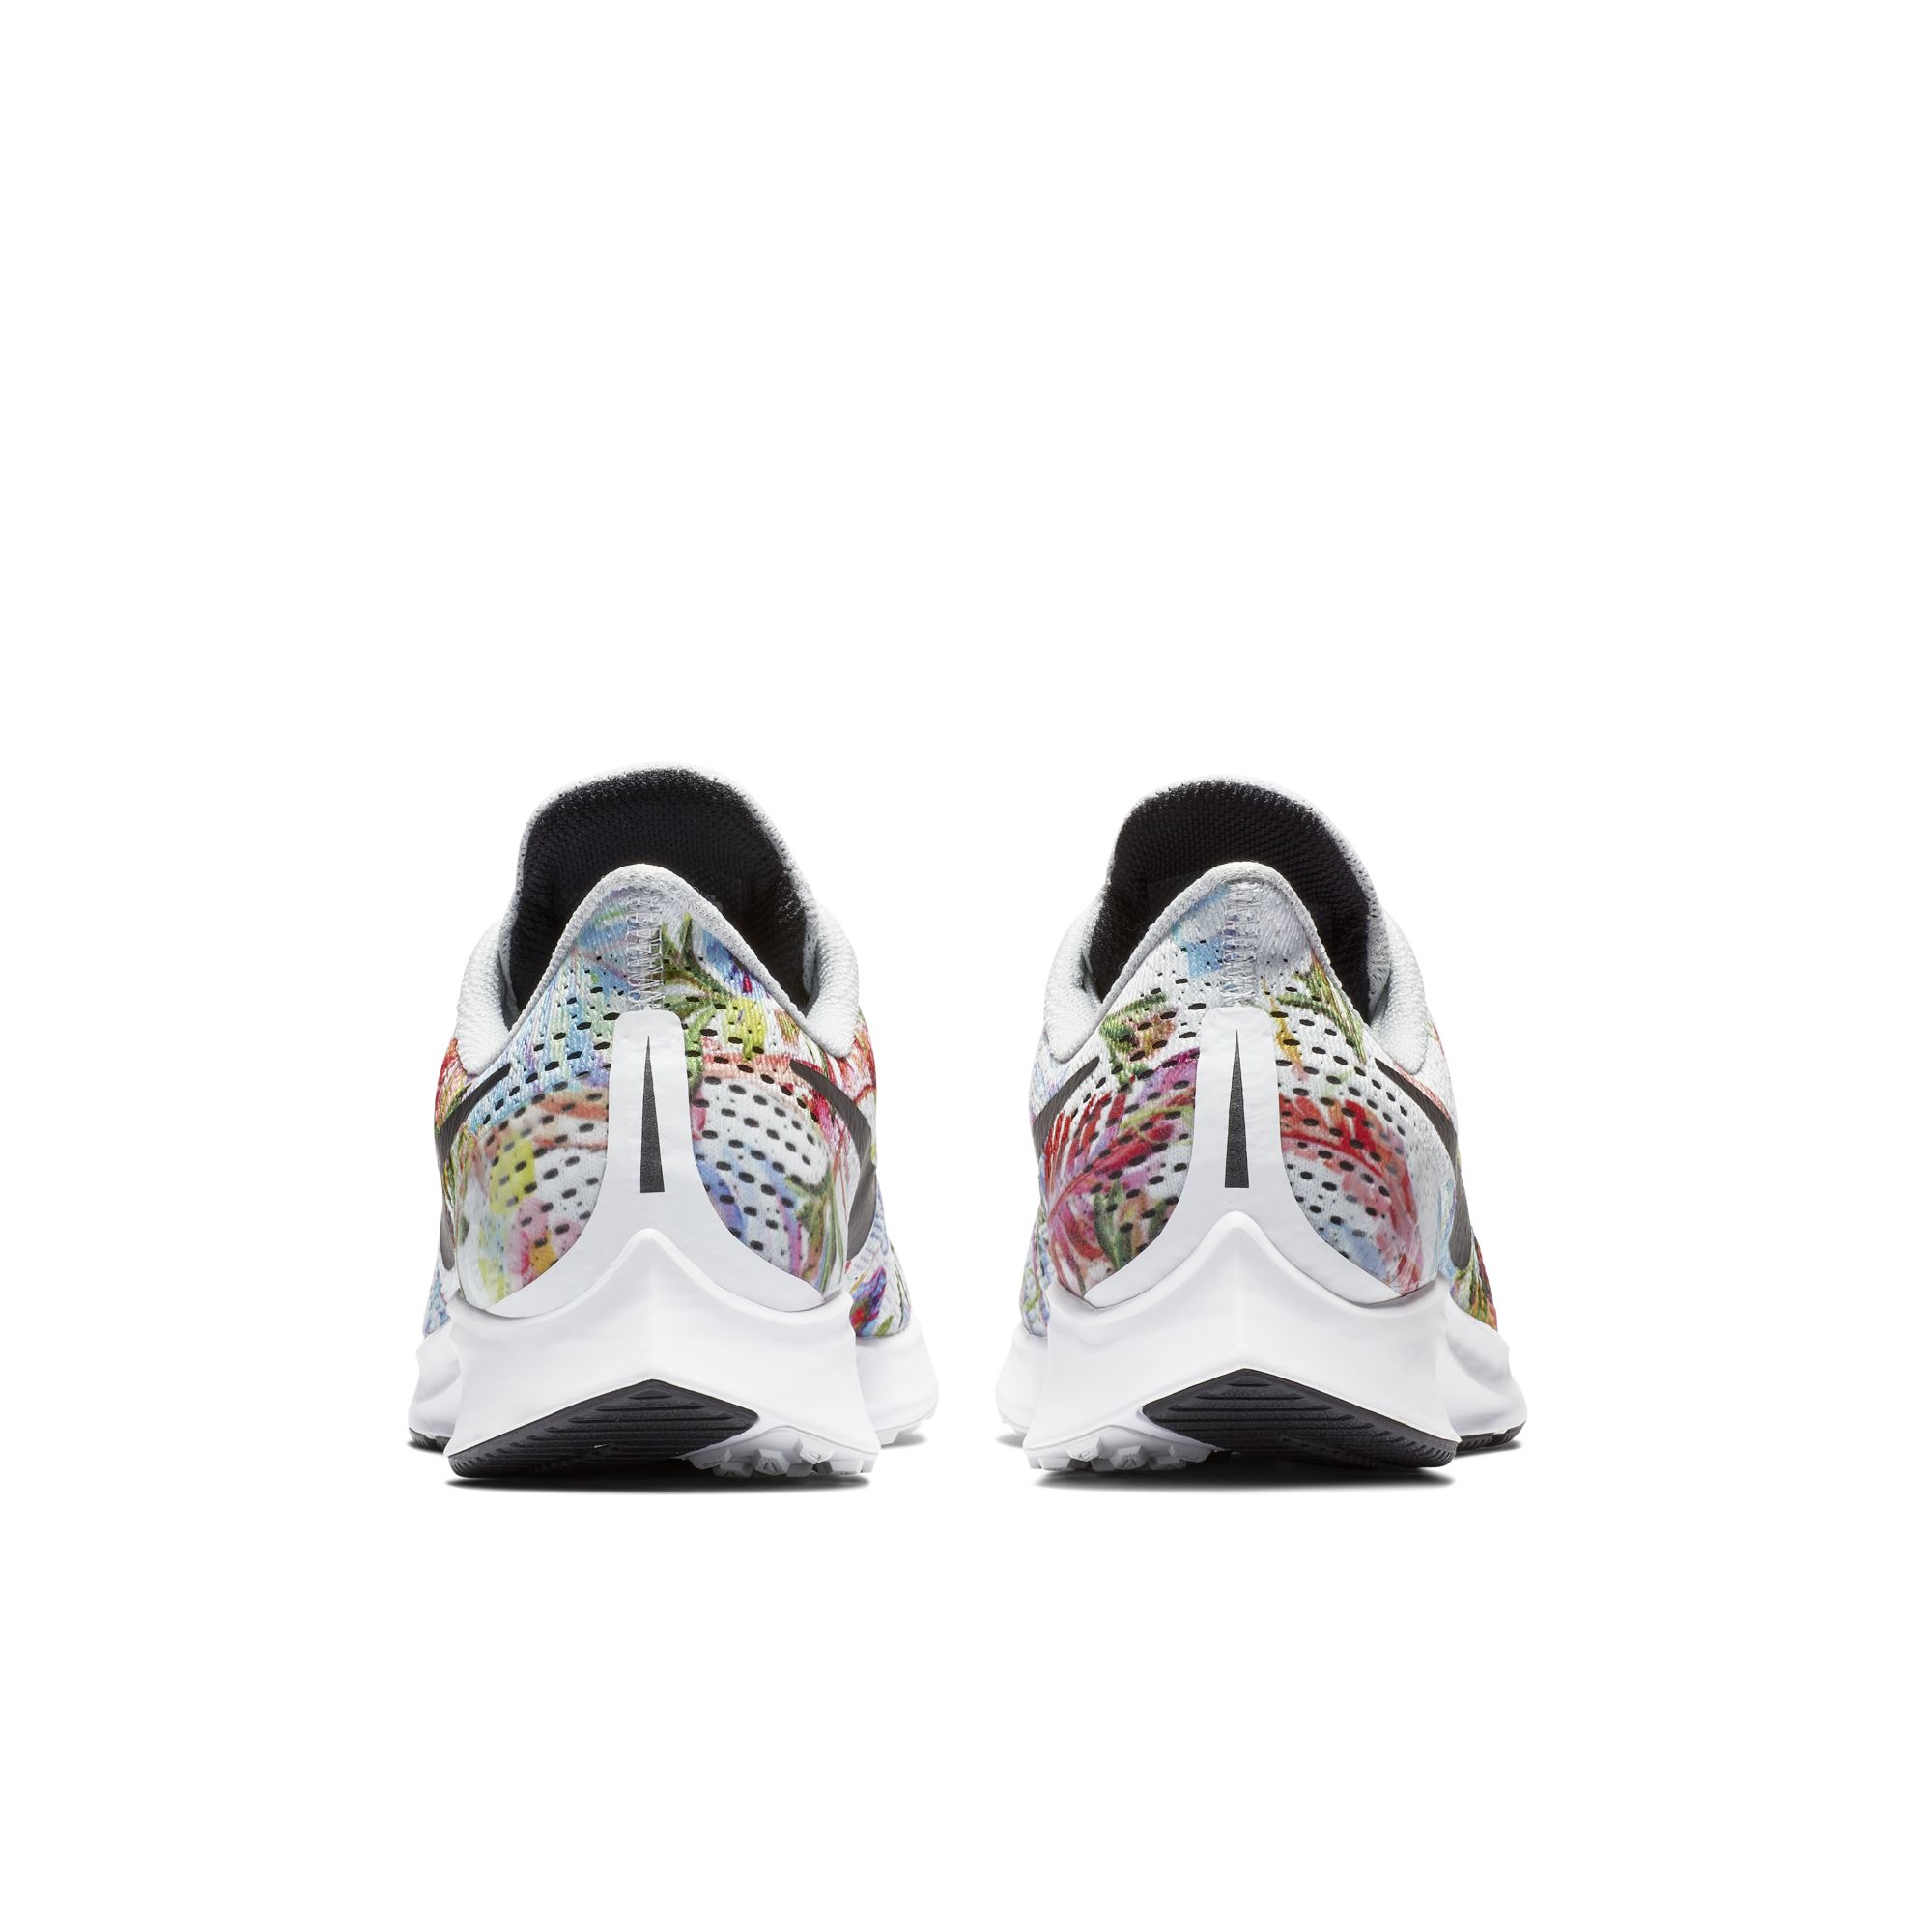 Ladies Get a Floral Air Zoom Pegasus 35 for Fall - WearTesters